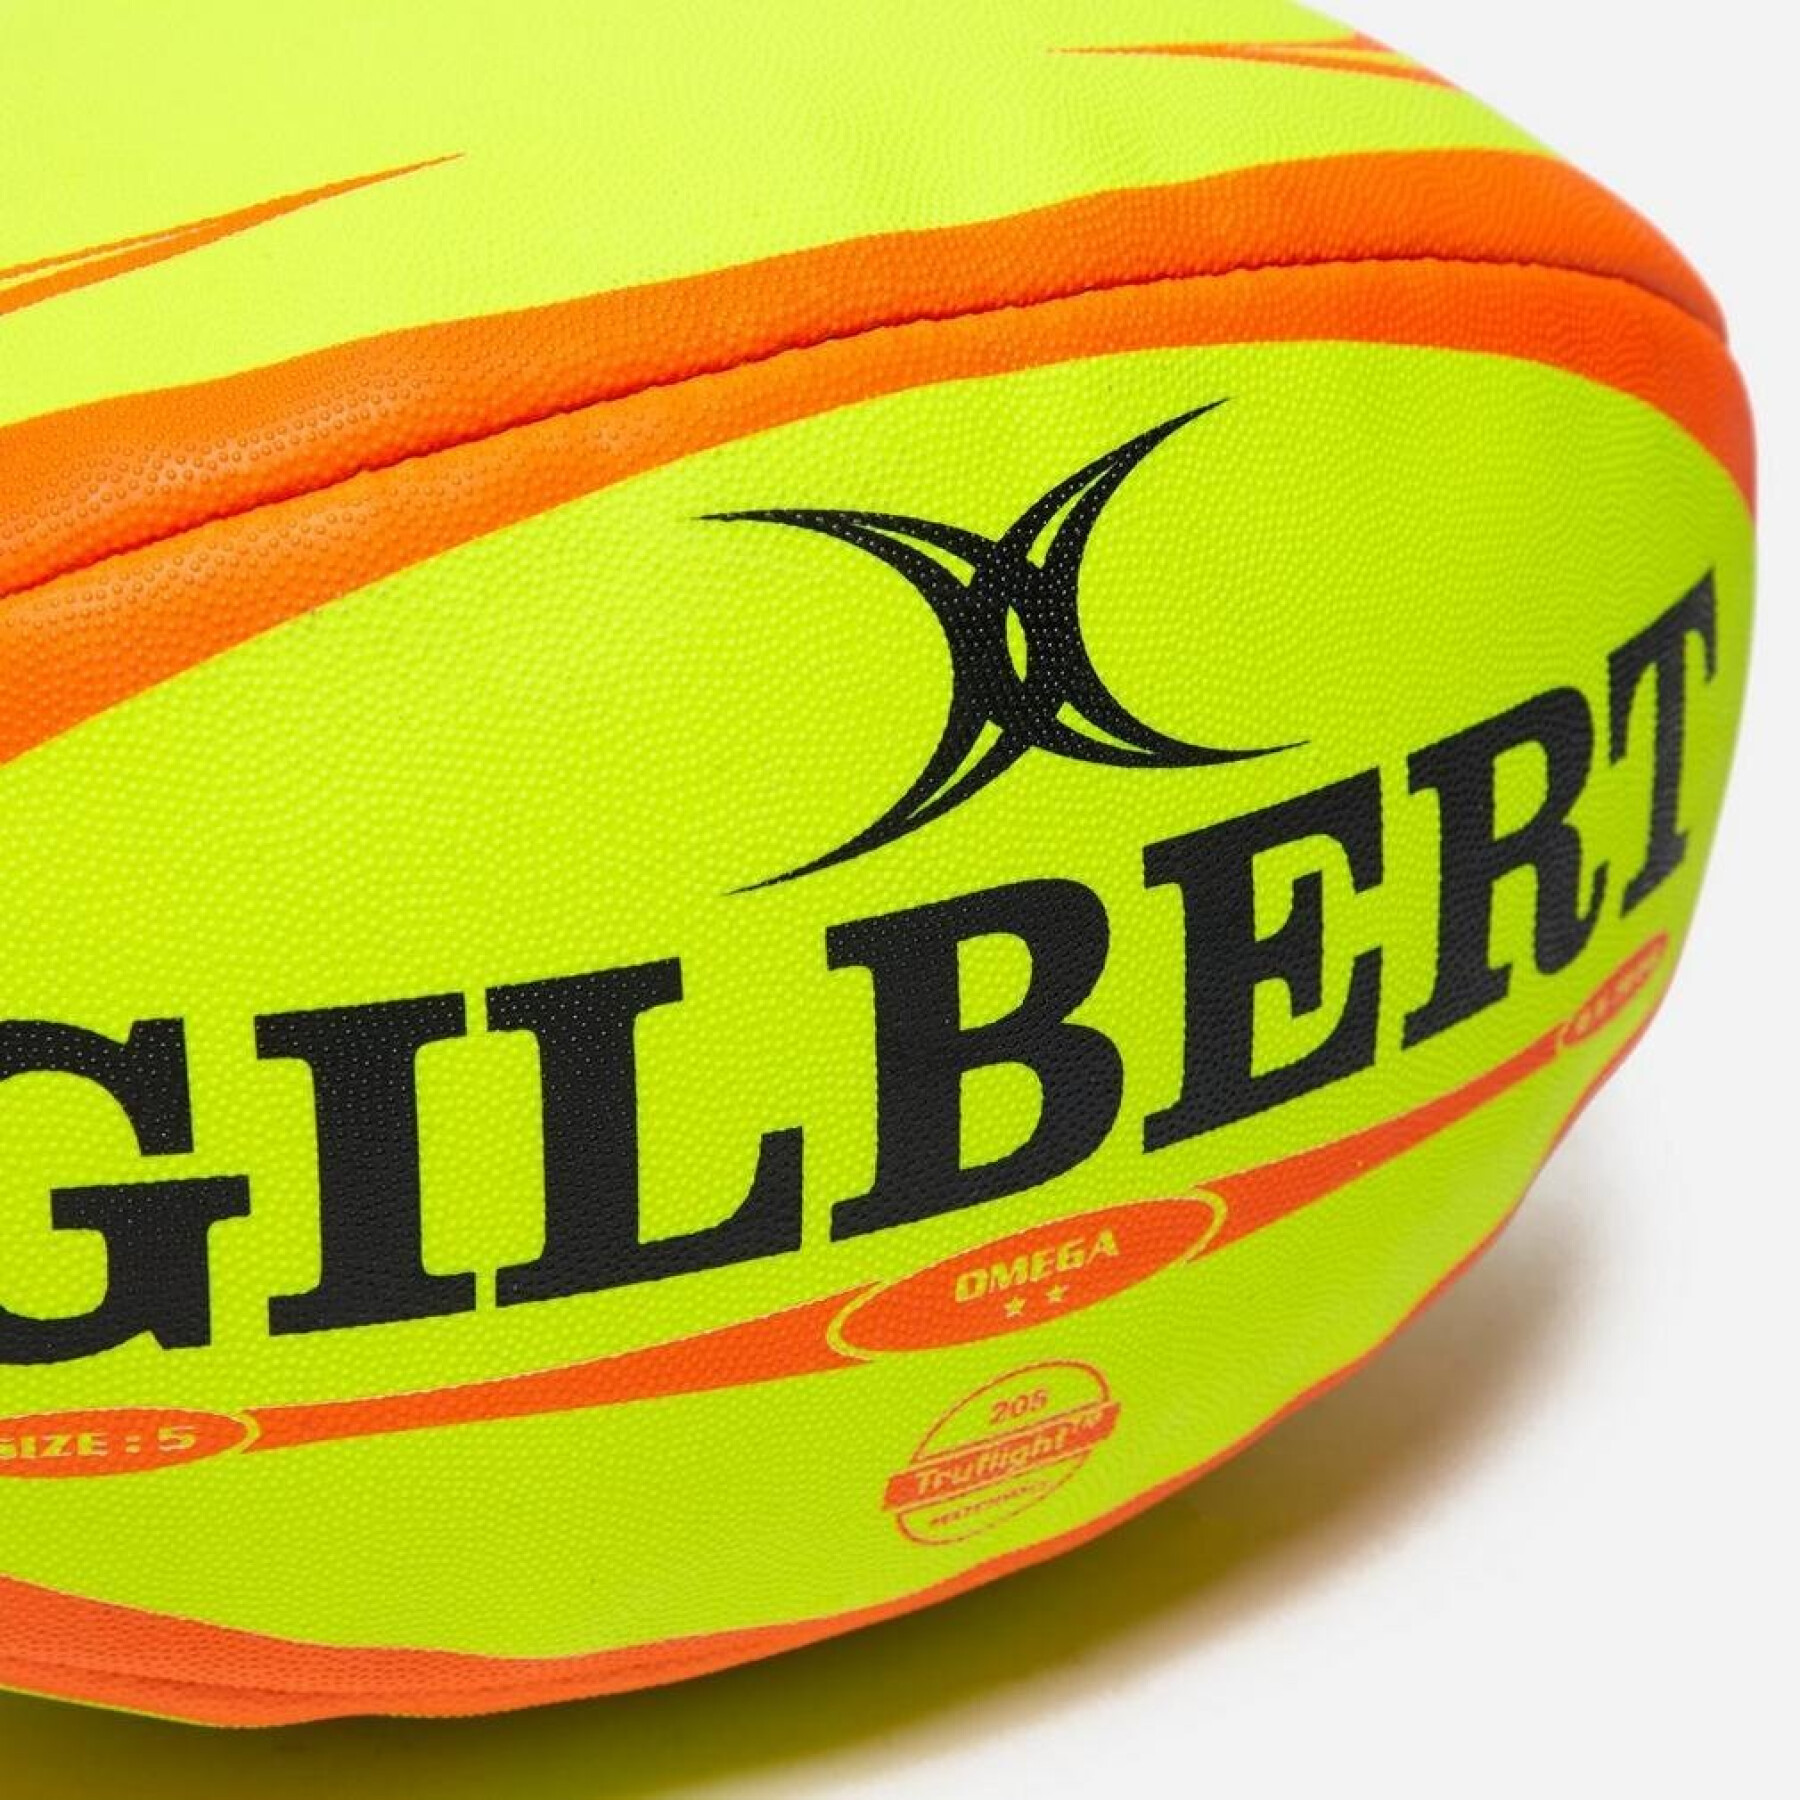 Rugby ball Gilbert Omega Fluo